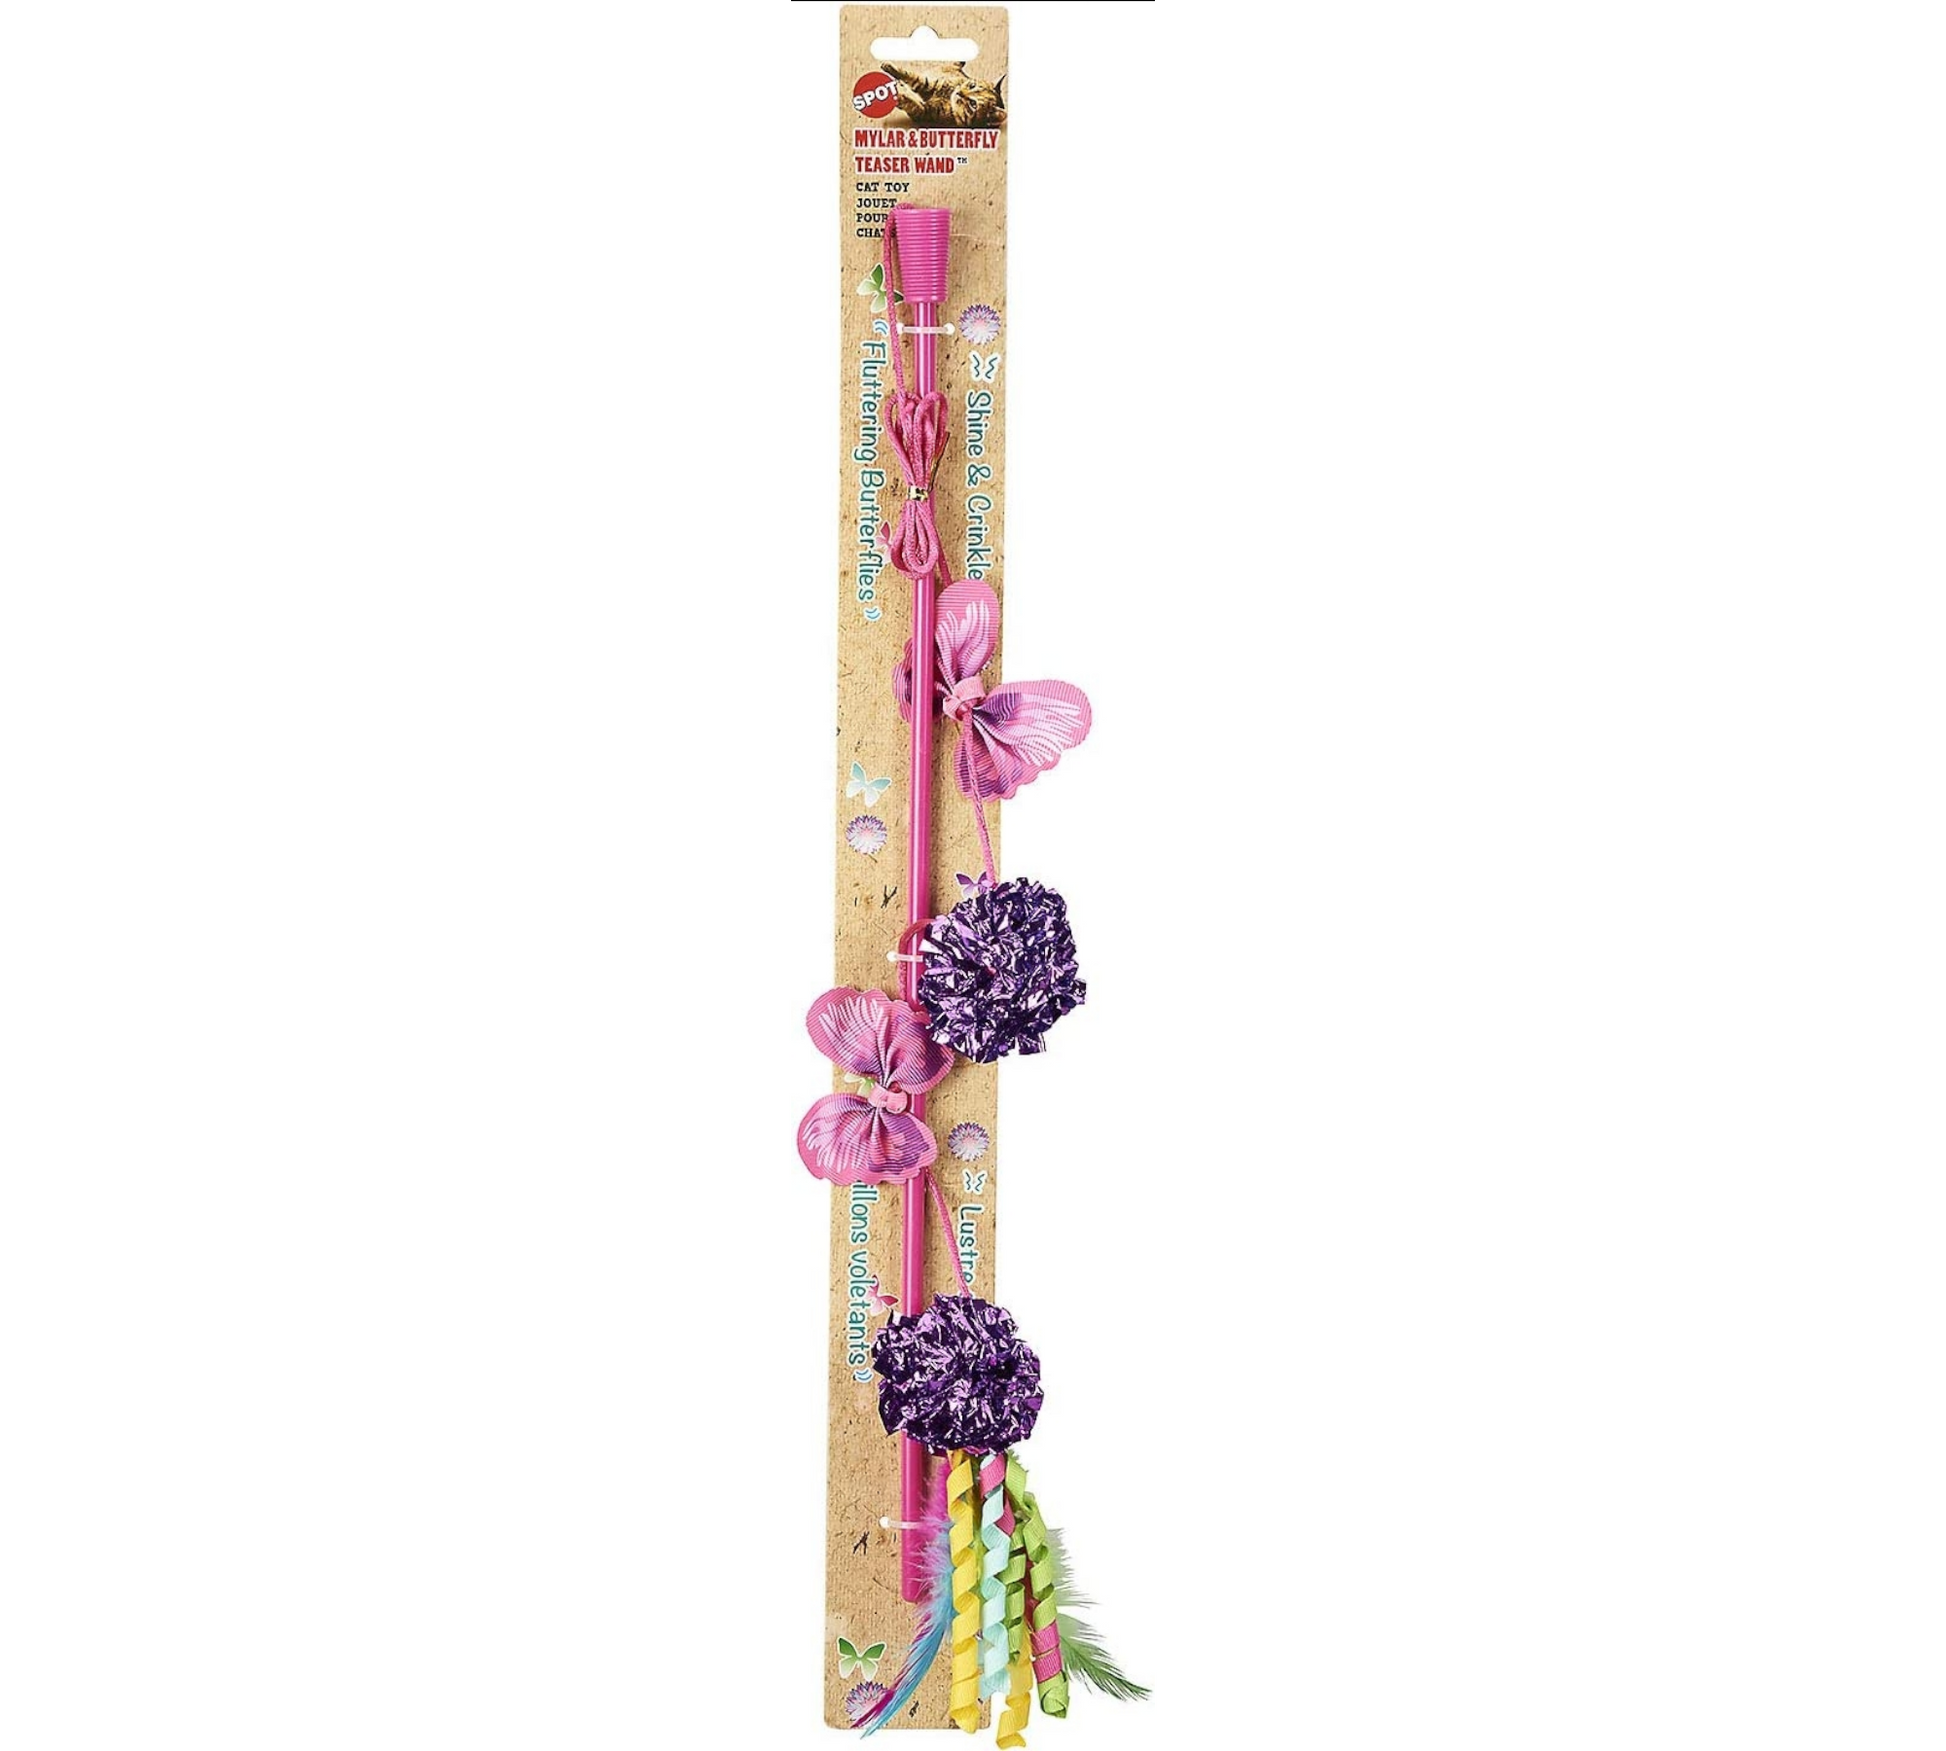 Canine's World Cat Teasers & Wand Toys Spot Butterfly and Mylar Teaser Wand Cat Toy, Color Varies Spot